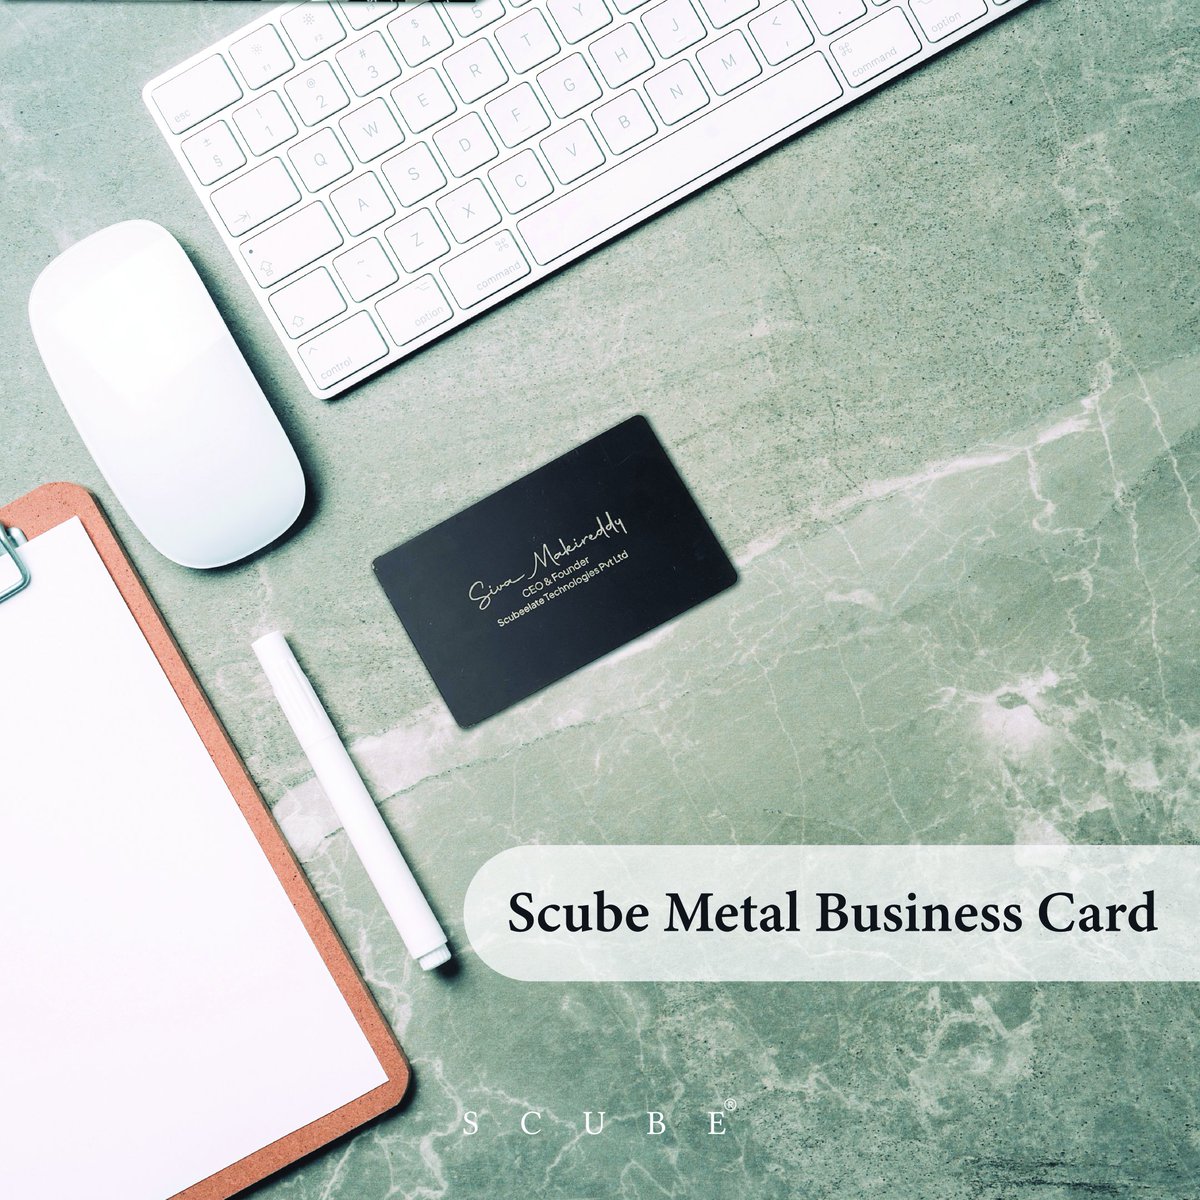 Scube Black Metal Business Card offers many benefits like durability and attractiveness to potential clients.
 #smartbusinesscard #tech #scubecards #scube #scubeme #nfccards #nfctechnology #businesscard #visitingcard #creativebusinesscards #customisedcards #metalbusinesscard